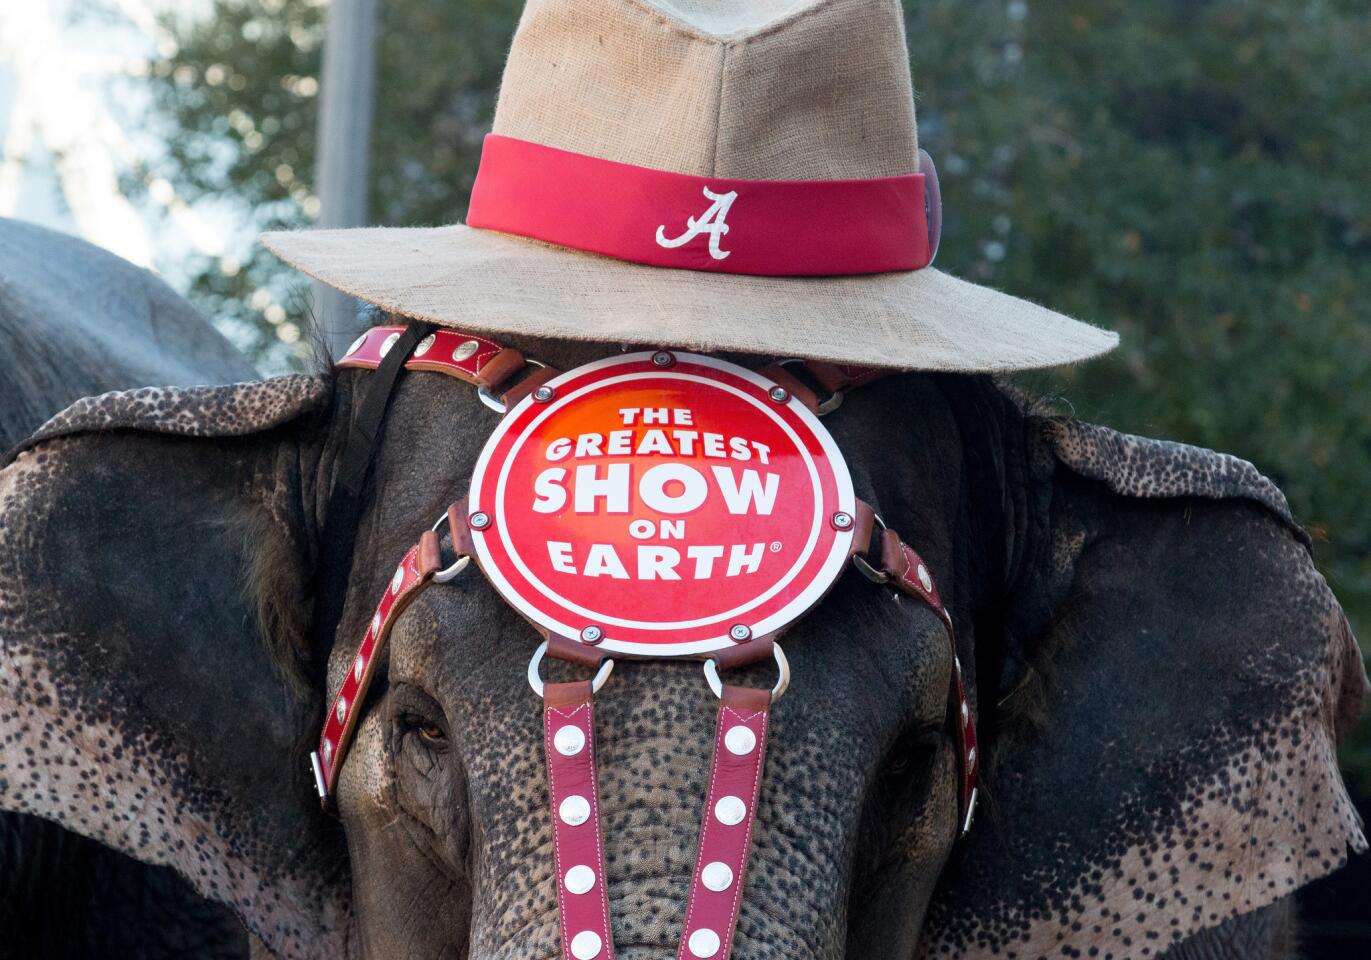 A circus elephant at the Ringling Bros. "Elephant Brunch" at Birmingham-Jefferson Civic Center on January 21, 2015 in Birmingham, Alabama.